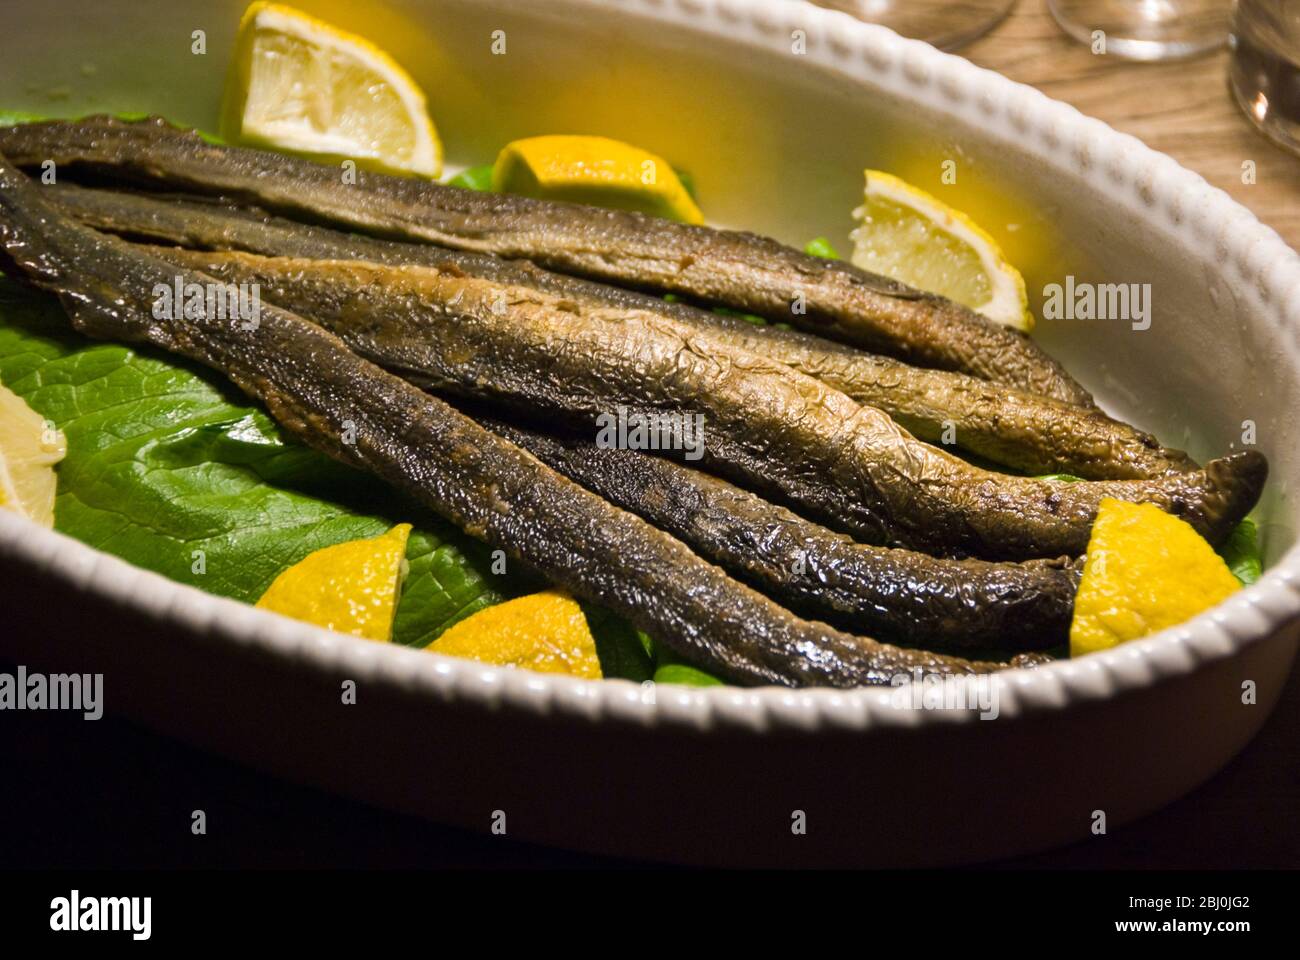 Lampreys from Finland served as a starter - Stock Photo